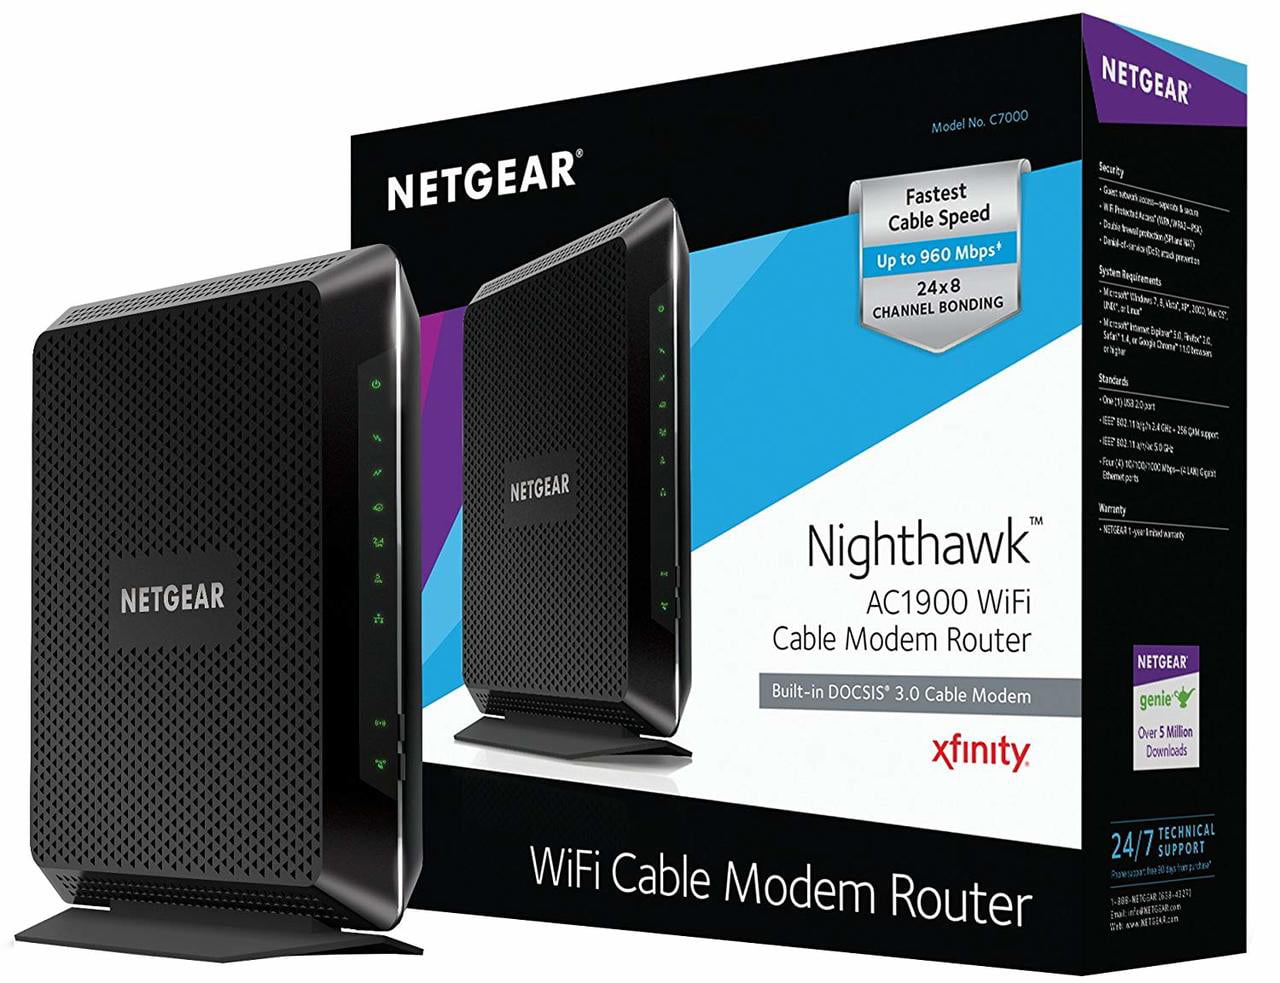 DOCSIS 3.0 WiFi Cable Modem Router Combo & more Spectrum Cox Certified for Xfinity from Comcast C7000 NETGEAR Nighthawk AC1900 24x8 